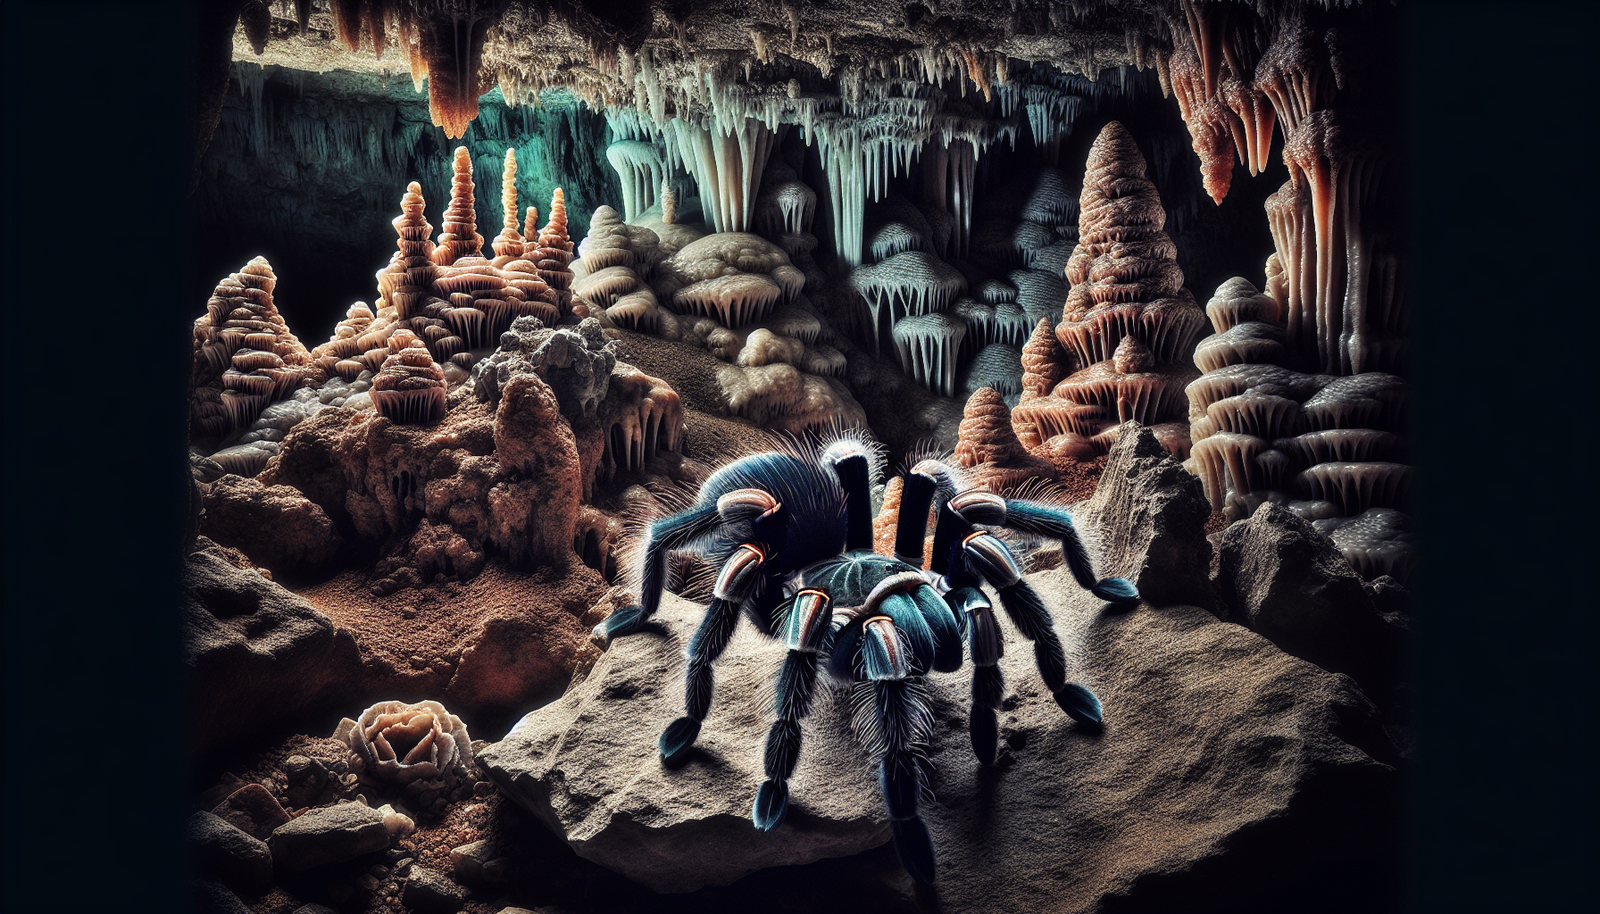 Can You Recommend Some Cave-dwelling Tarantula Varieties That Are Suitable For Exotic Pet Enthusiasts?